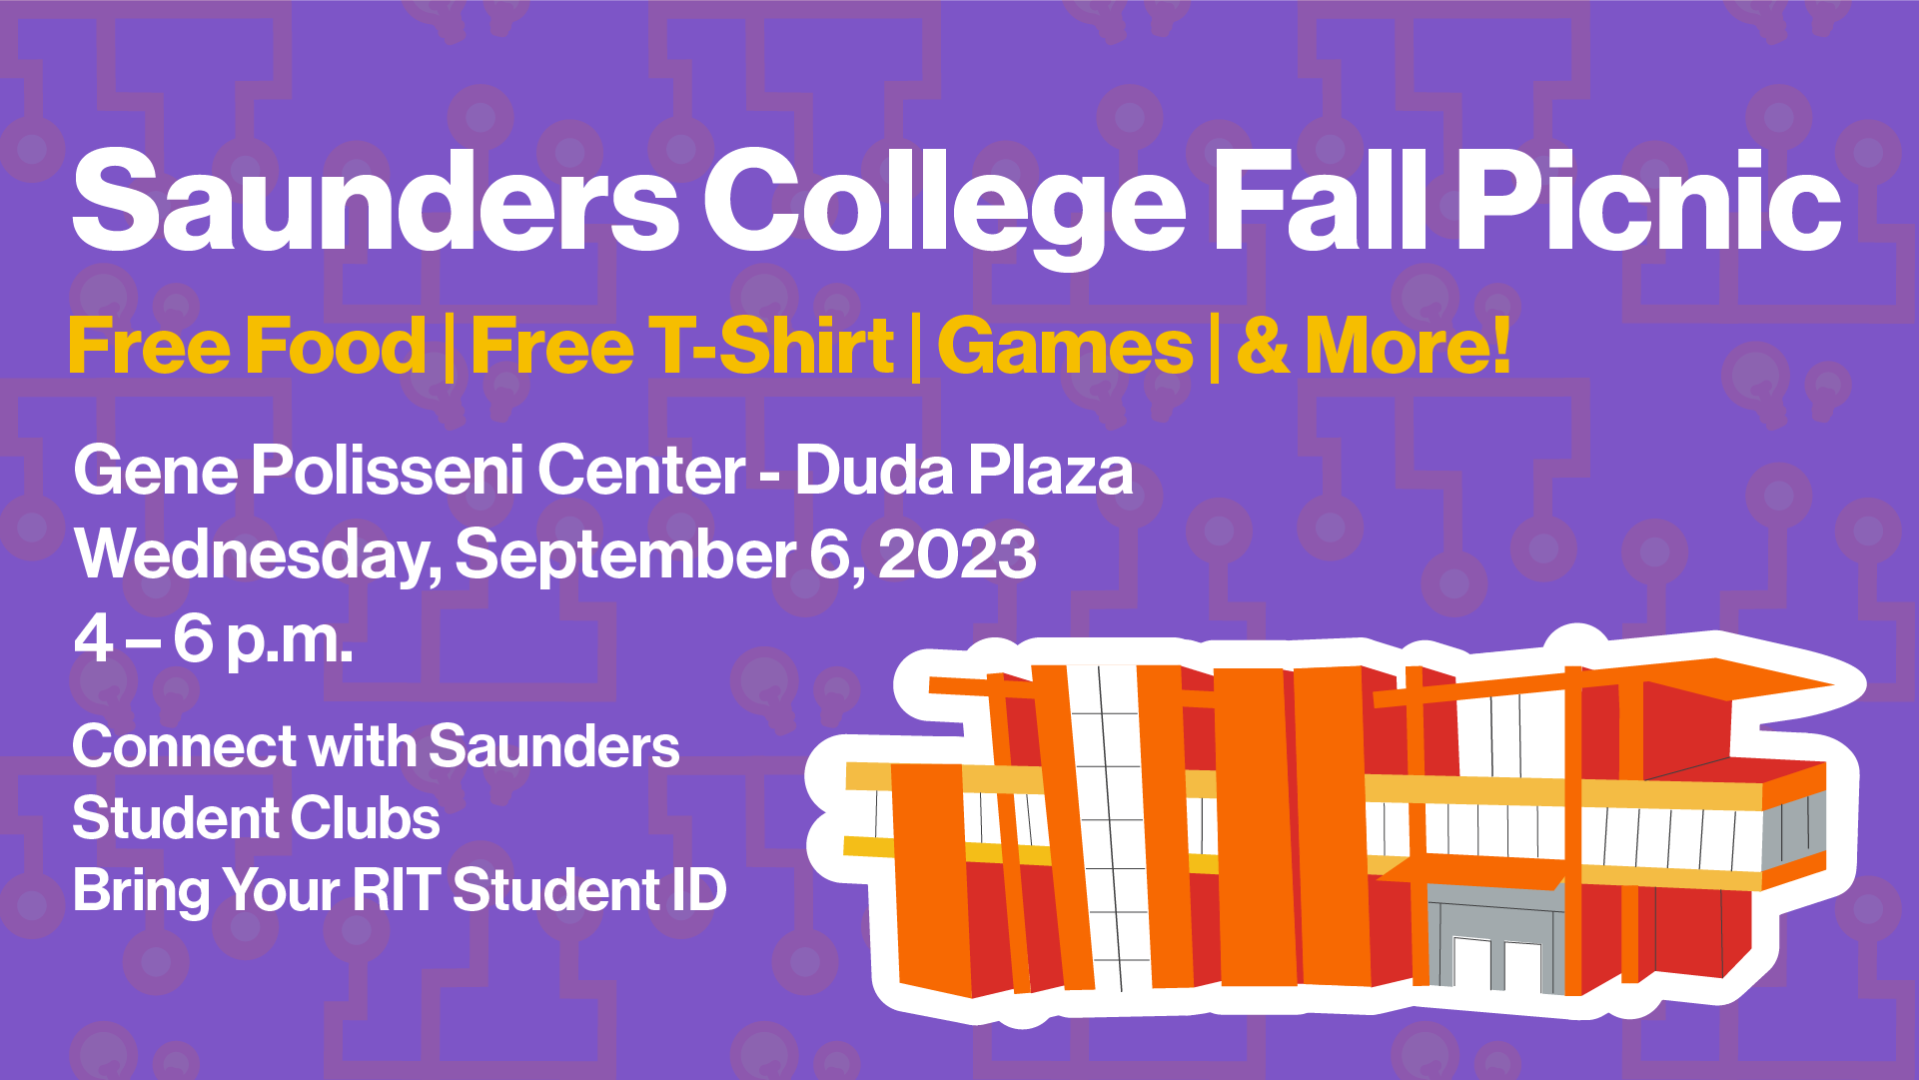 Saunders College Fall Picnic